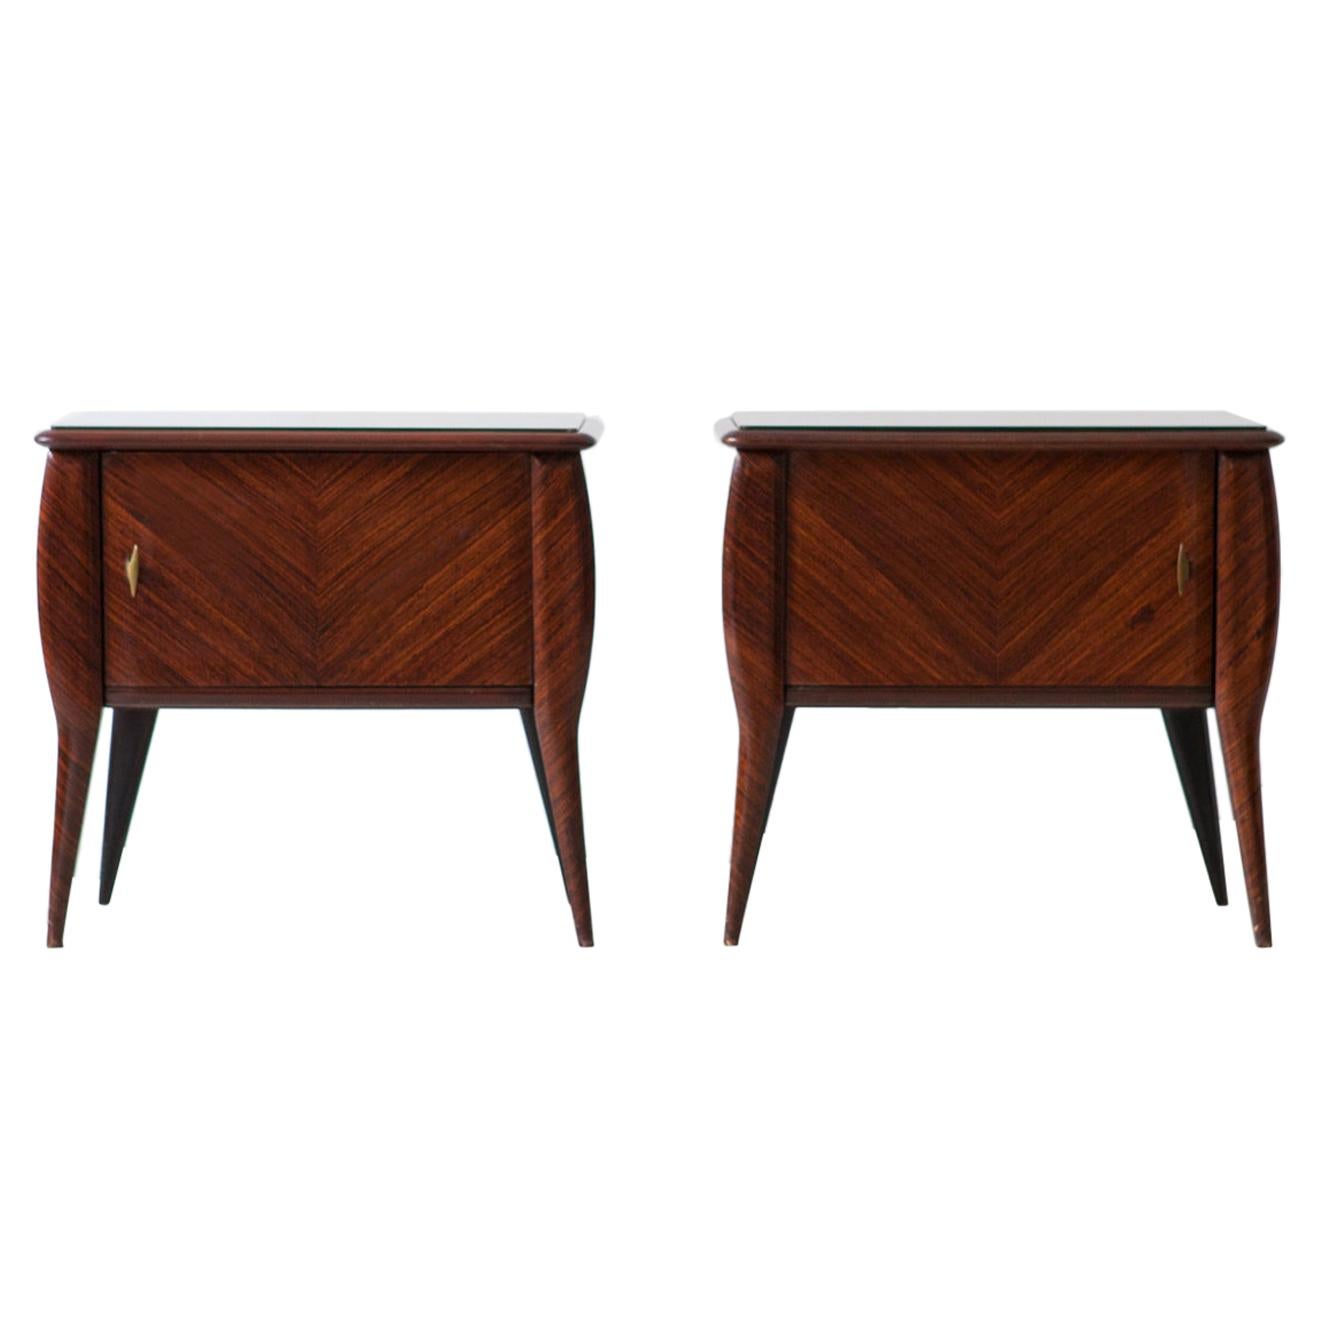 Pair of Italian Mahogany Wood Bedside Tables with Grey Glass Top, 1950s